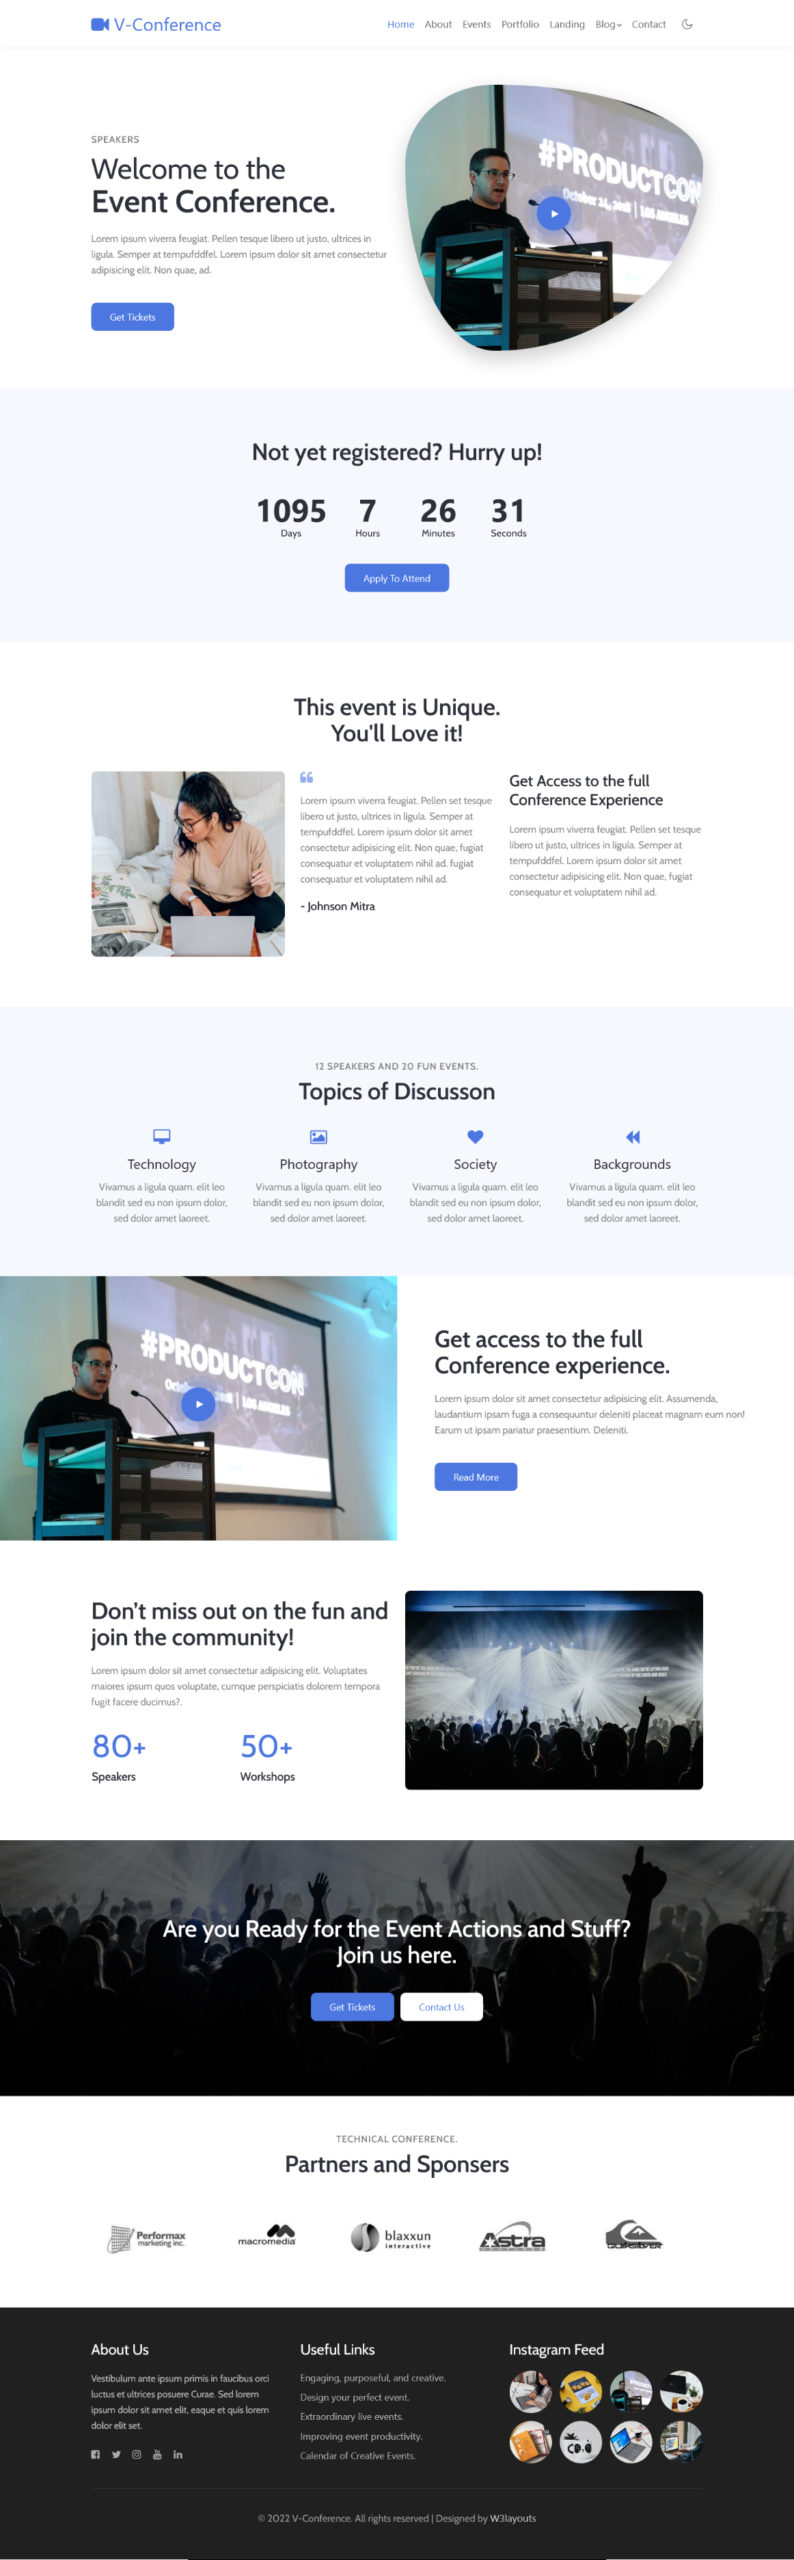 v-conference a corporate website template